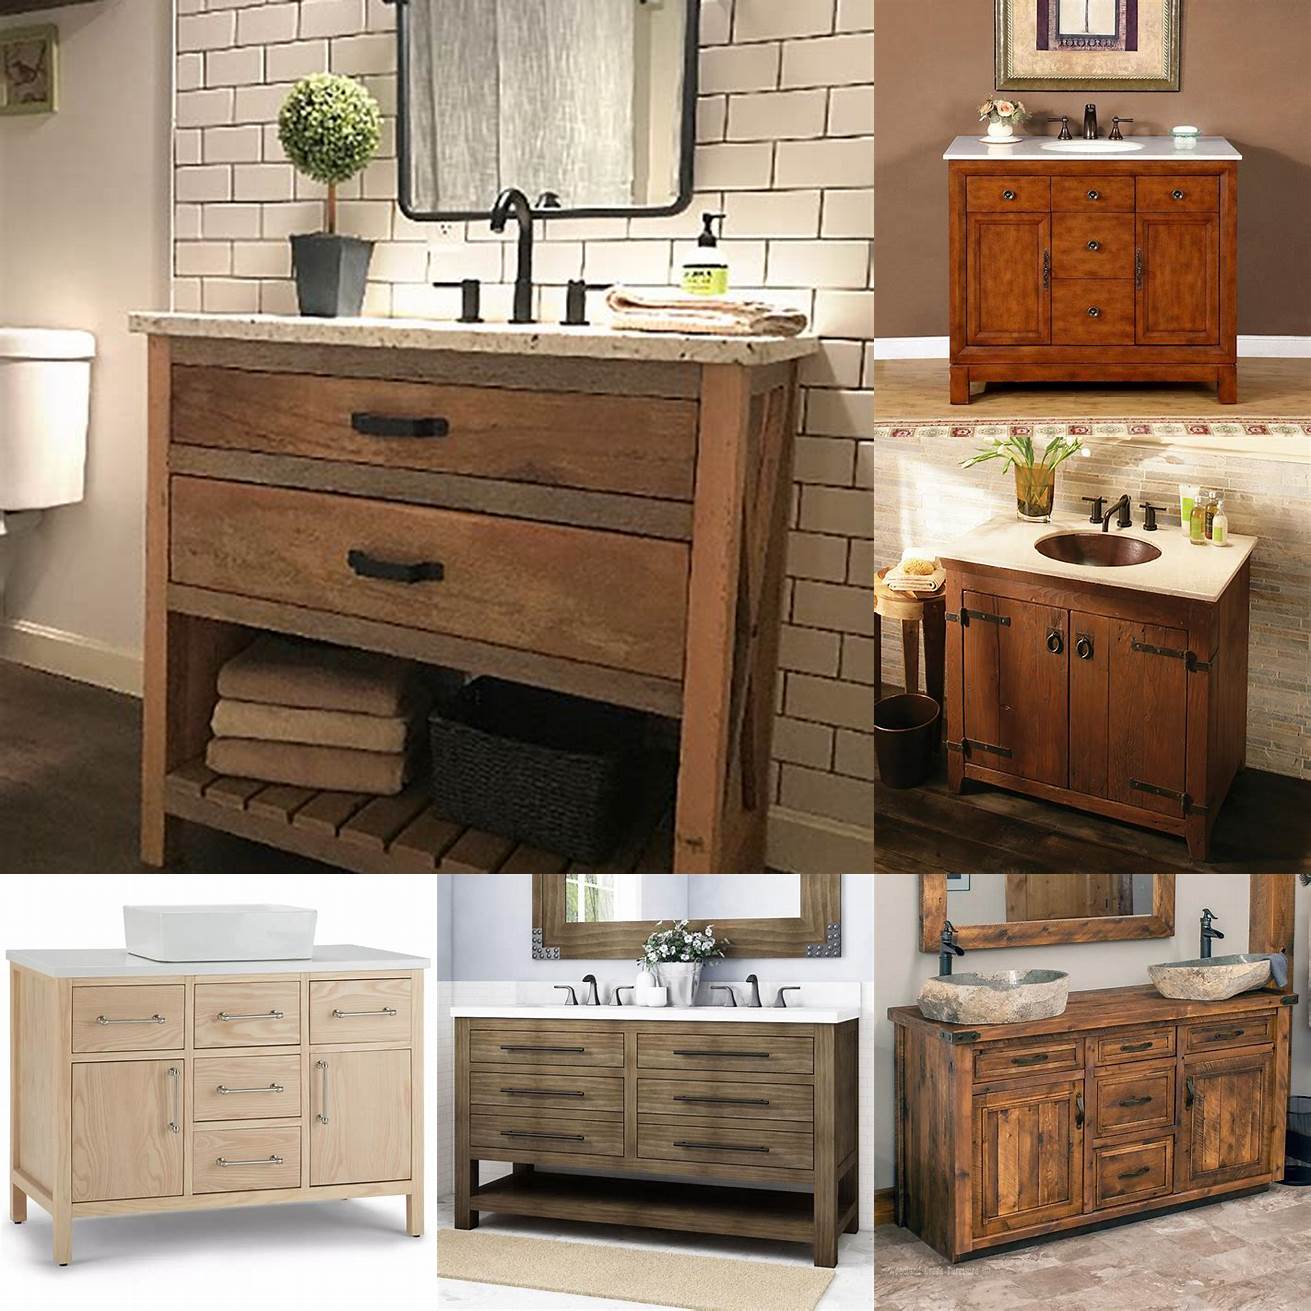 Rustic-style 42-inch bathroom vanity with natural wood countertop